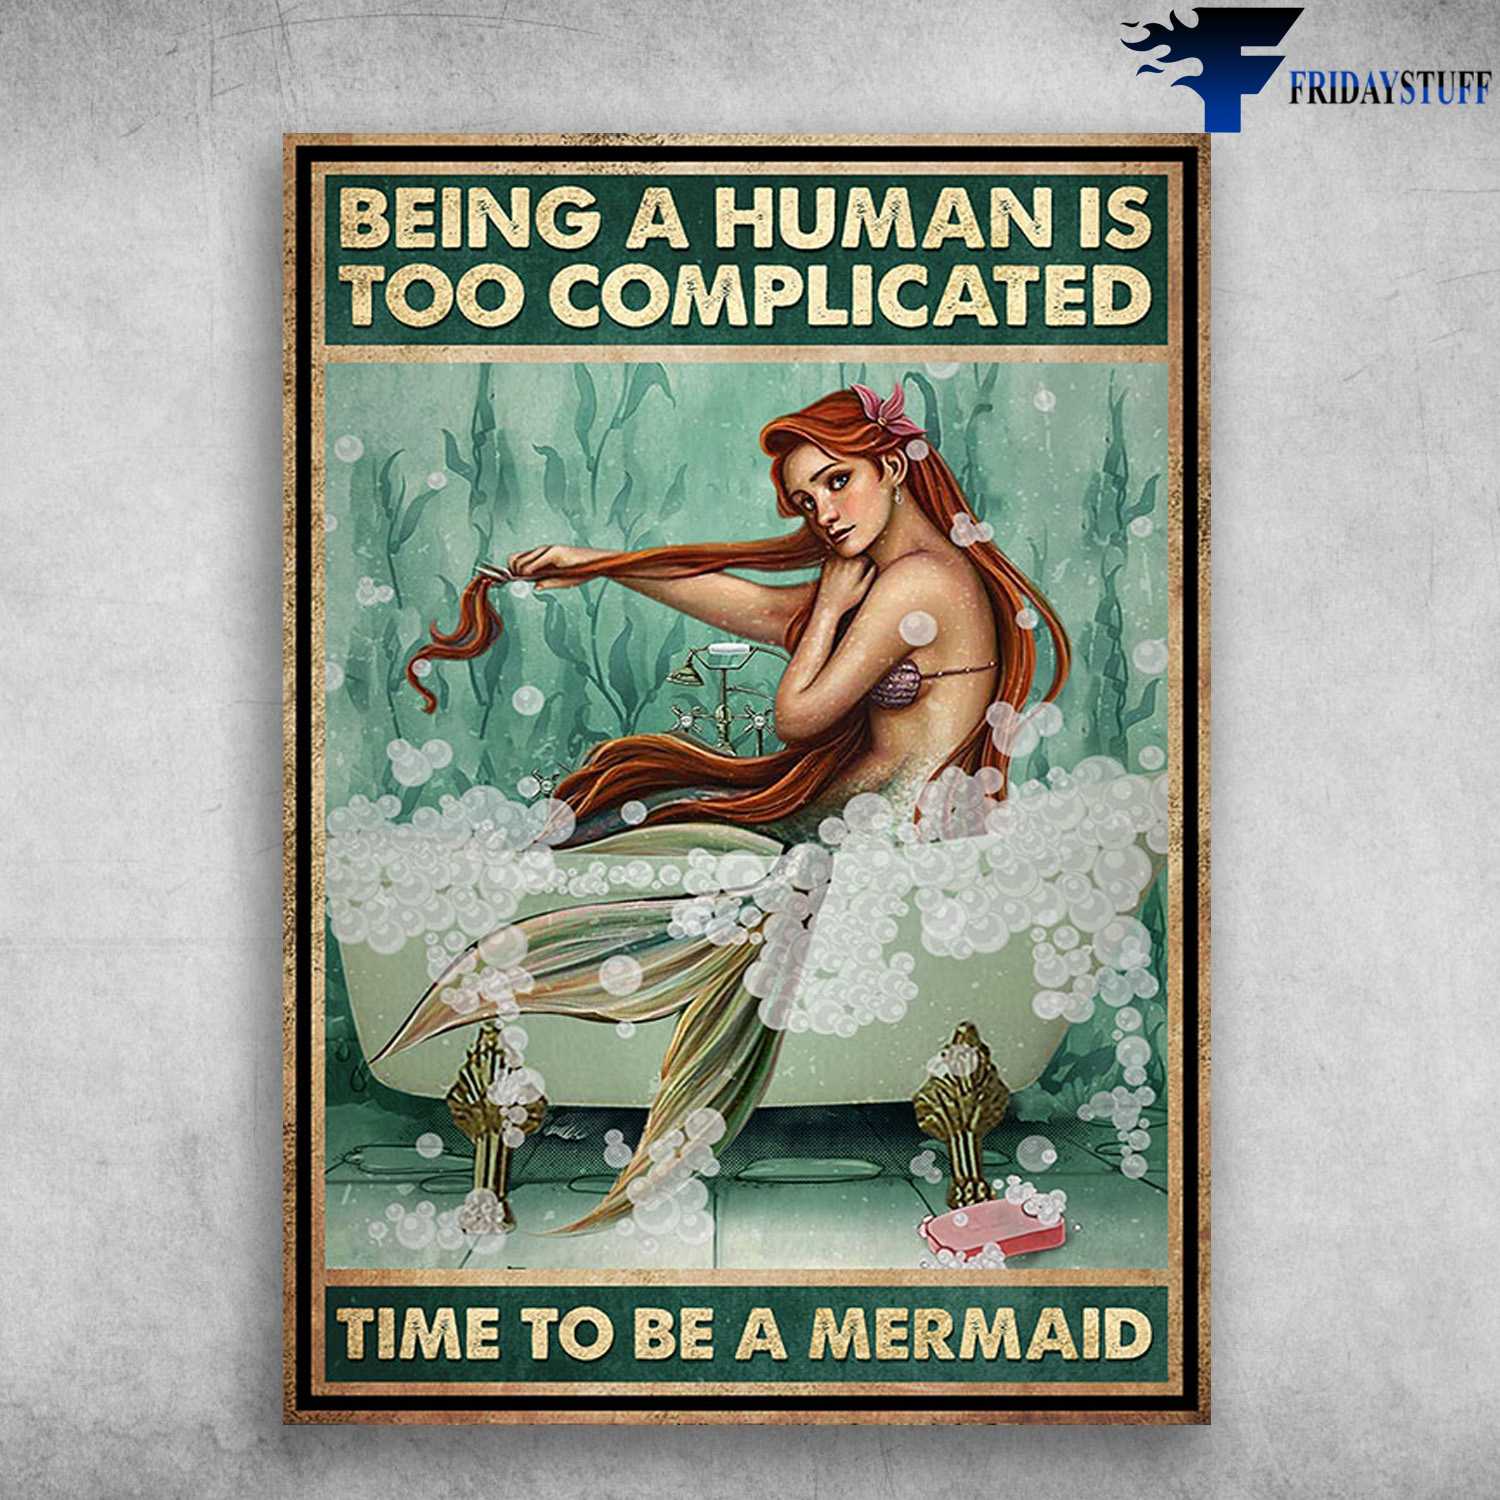 Mermaid Bath - Being A Human Is Too Complicated, Time To Be A Mermaid